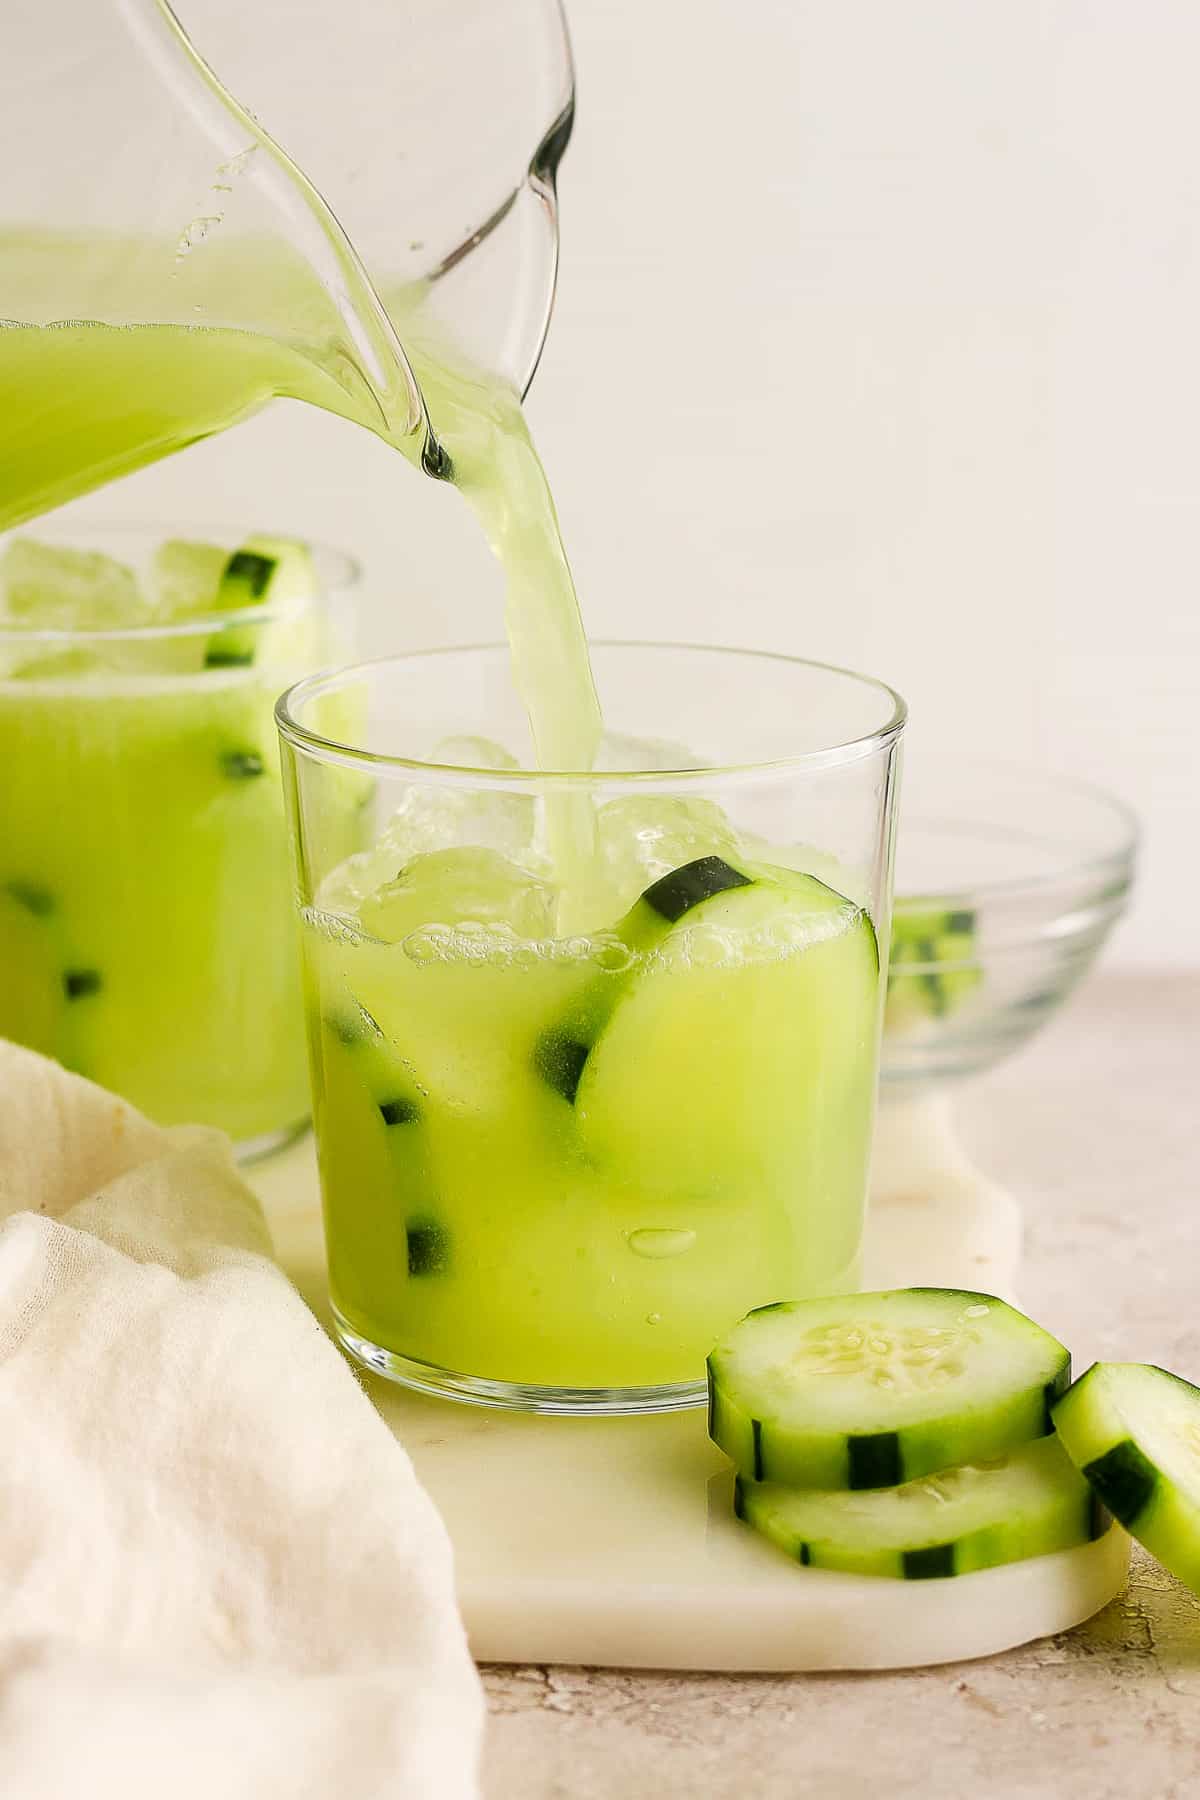 Agua de pepino being poured into an glass of ice.